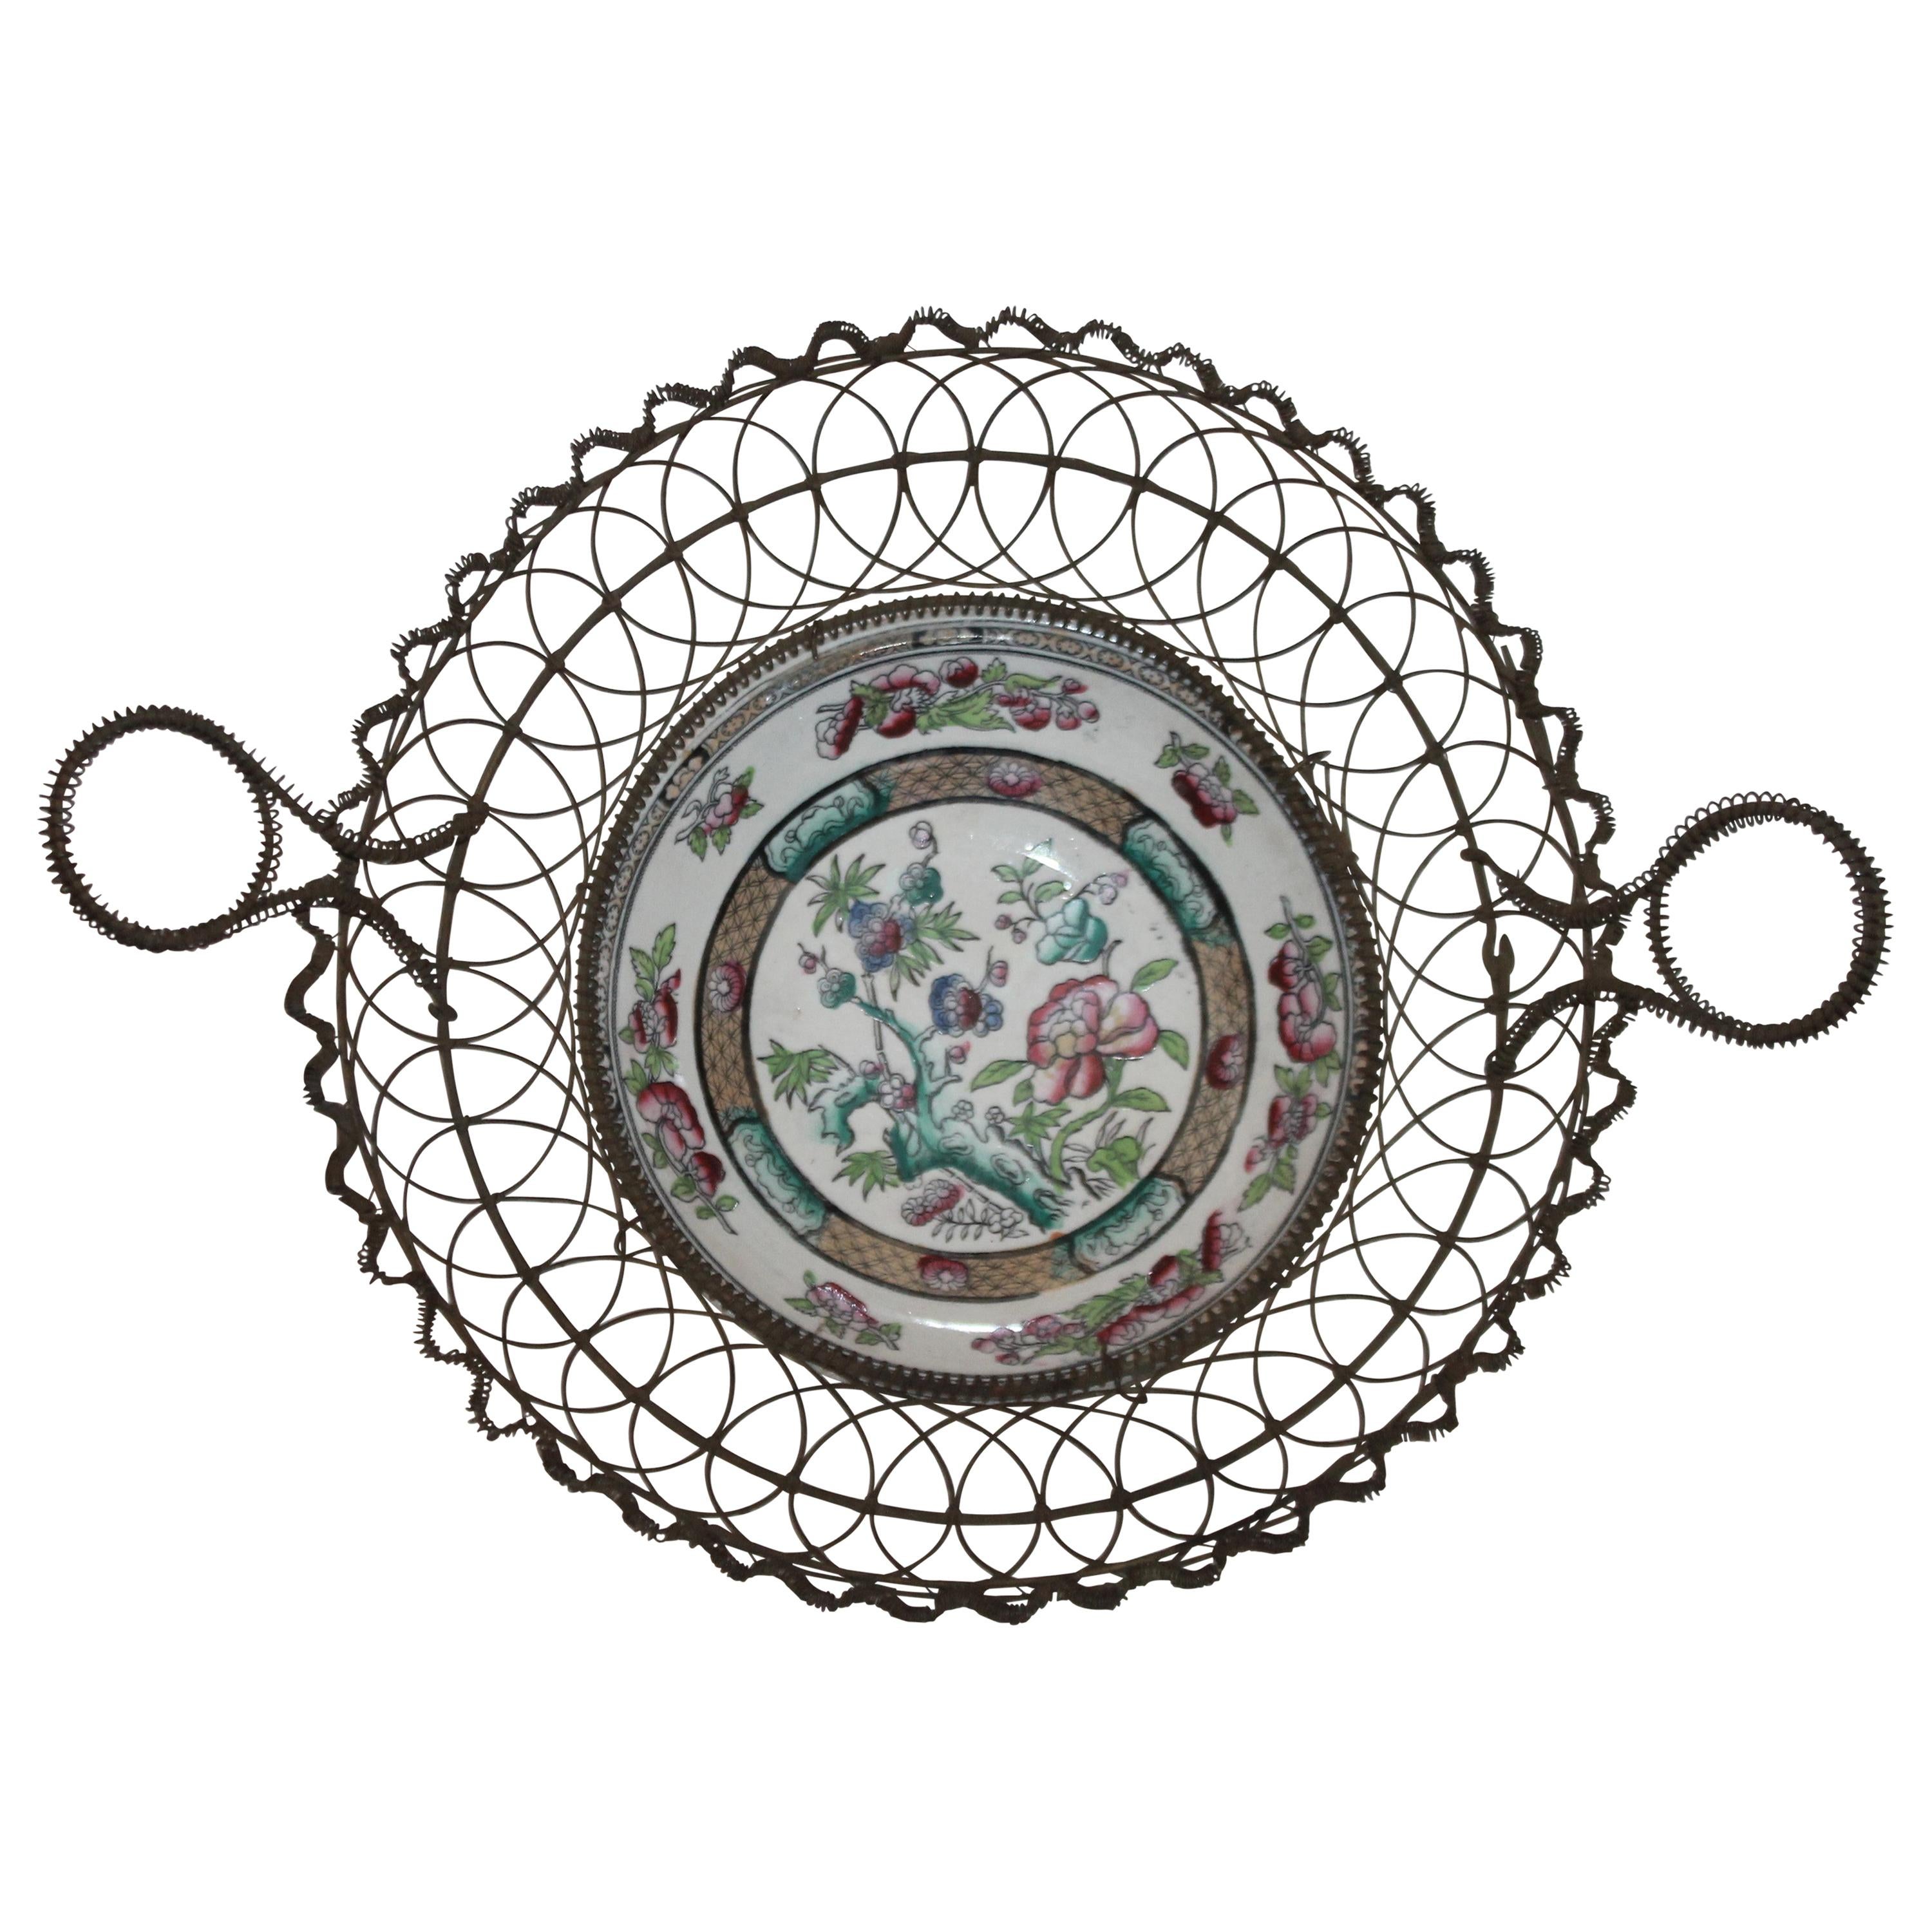 19th Century Handmade Wire Basket from 1870 with a Bowl Inset